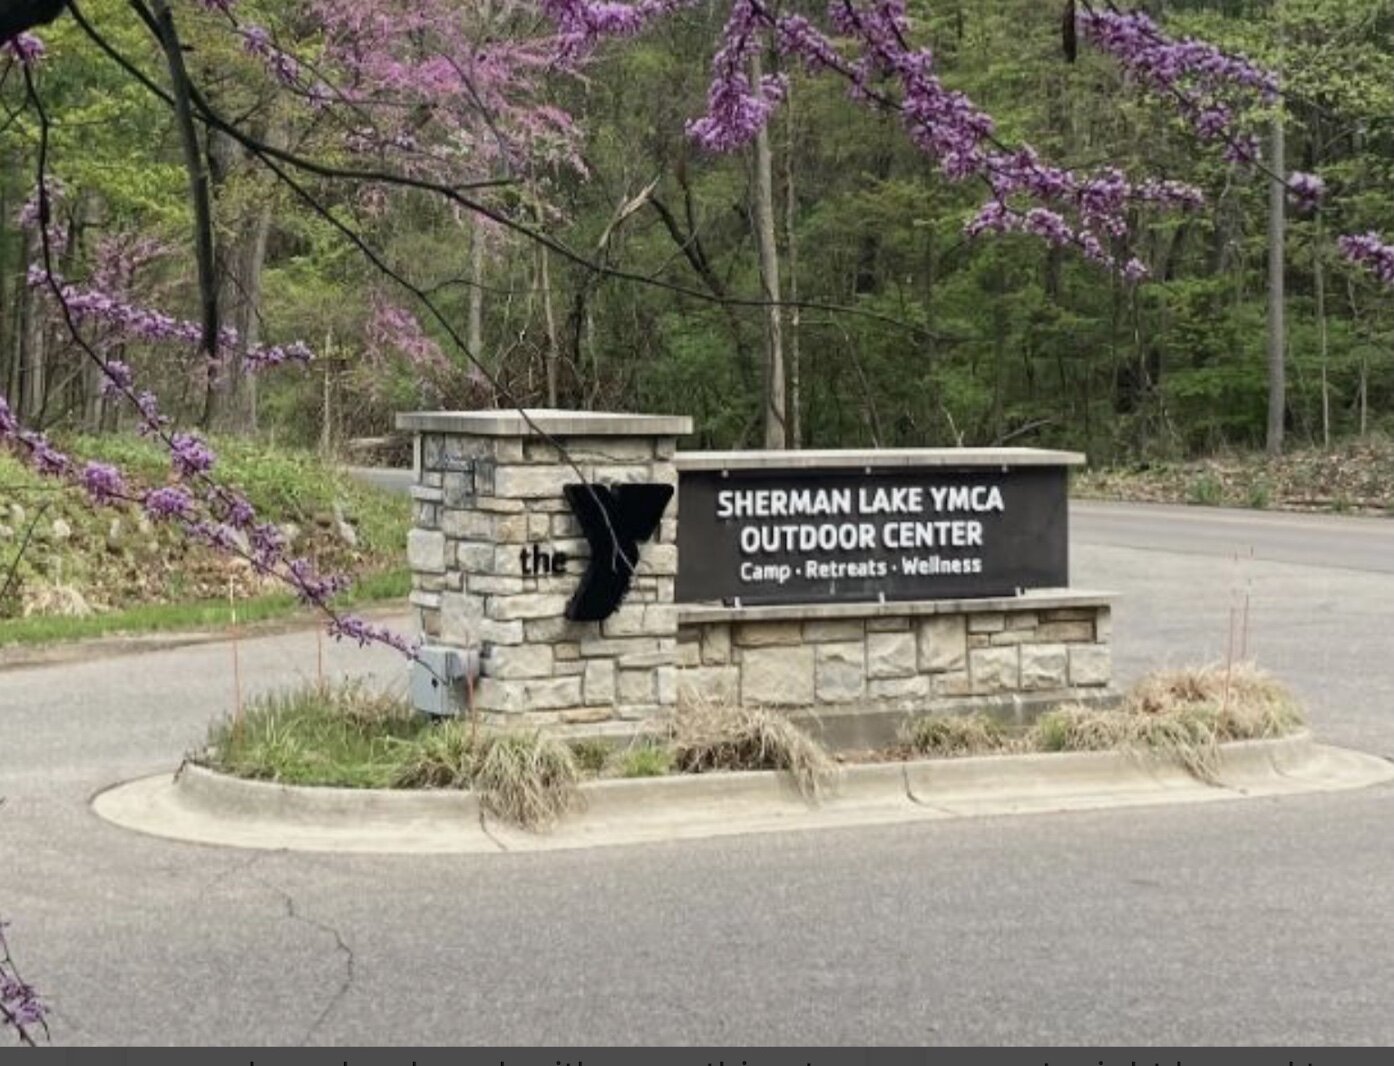 Sherman Lake YMCA Outdoor Center in Augusta, a camp for kids 7 - 14 years old, will be more inclusive this season thanks for special staff training and resources.